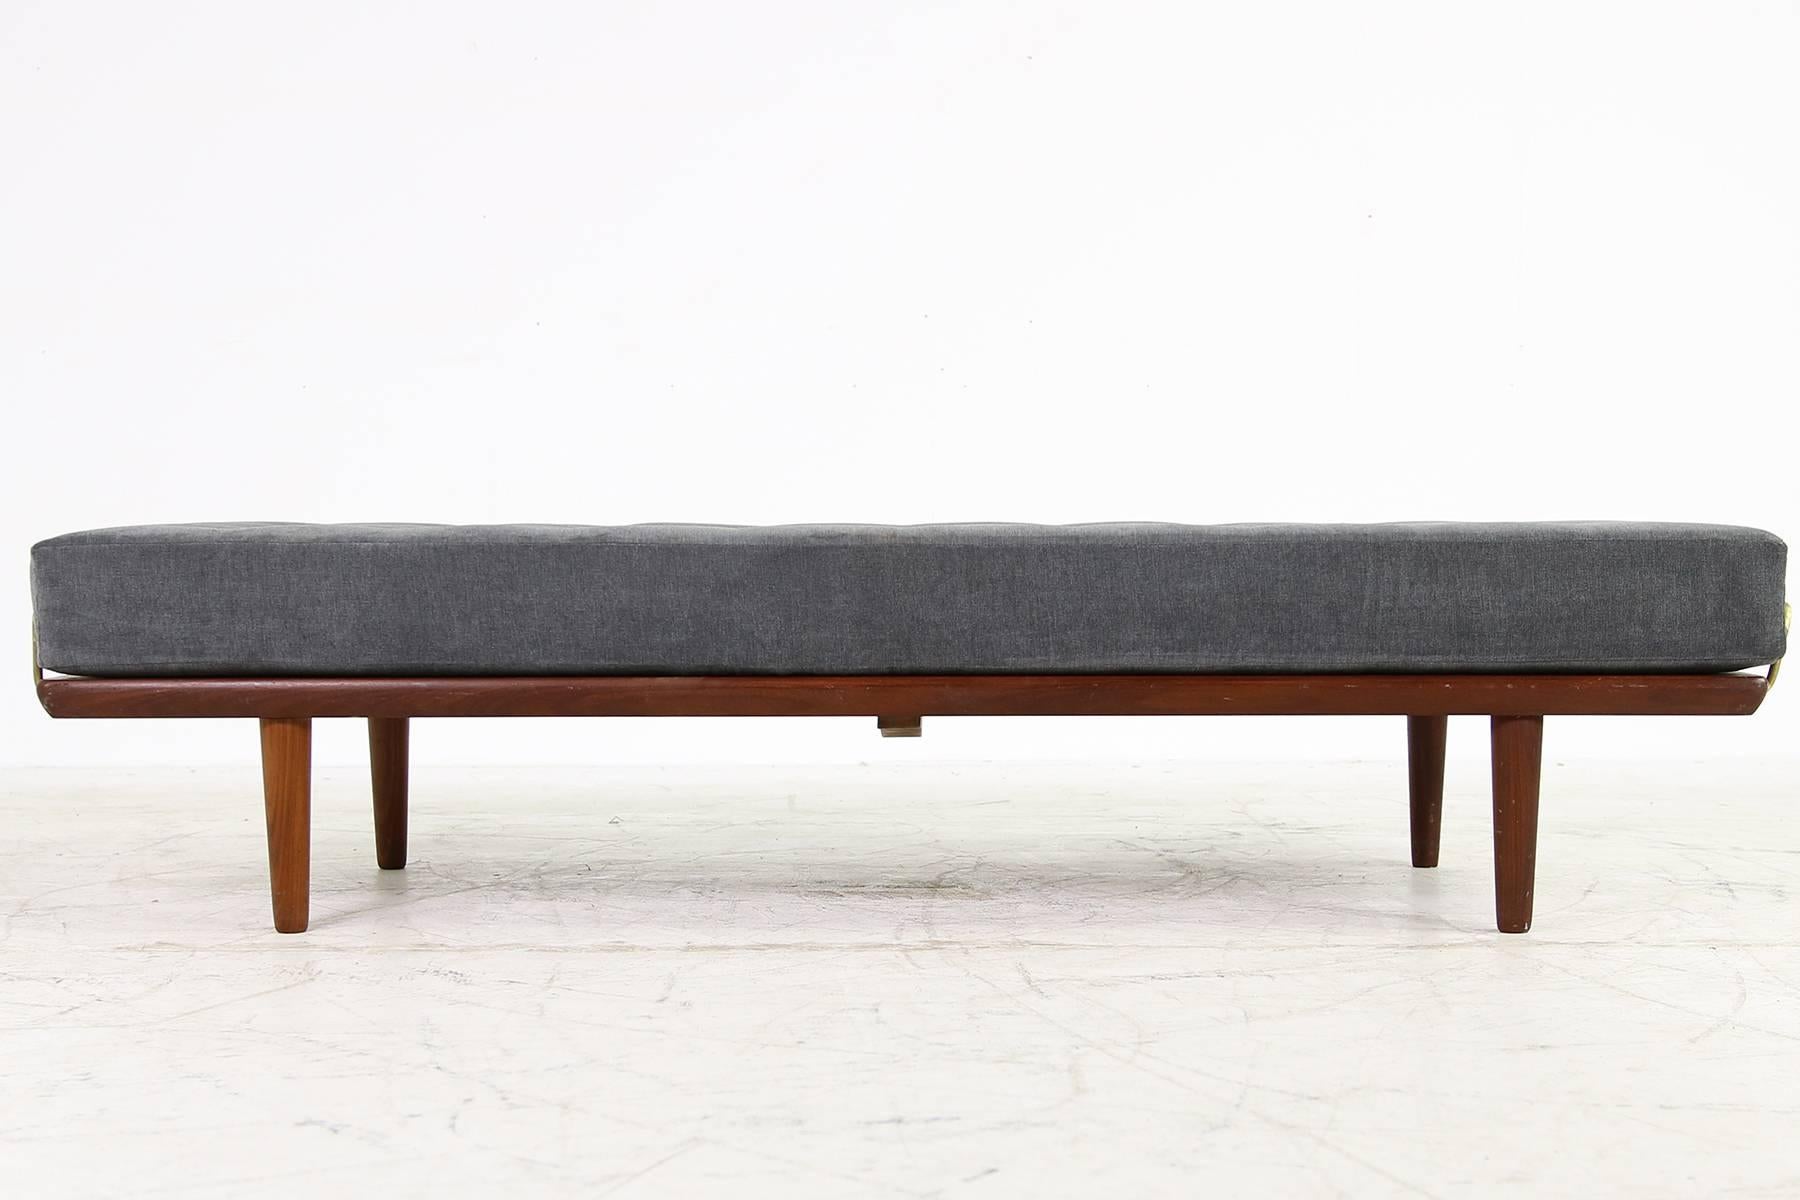 Amazing 1950s Hans J. Wegner daybed, model GE19 for GETAMA, Denmark. Very good condition, the original mattress was reupholstered and covered with new, high quality soft woven fabric in dark grey. The teak wood frame is in a fantastic condition.